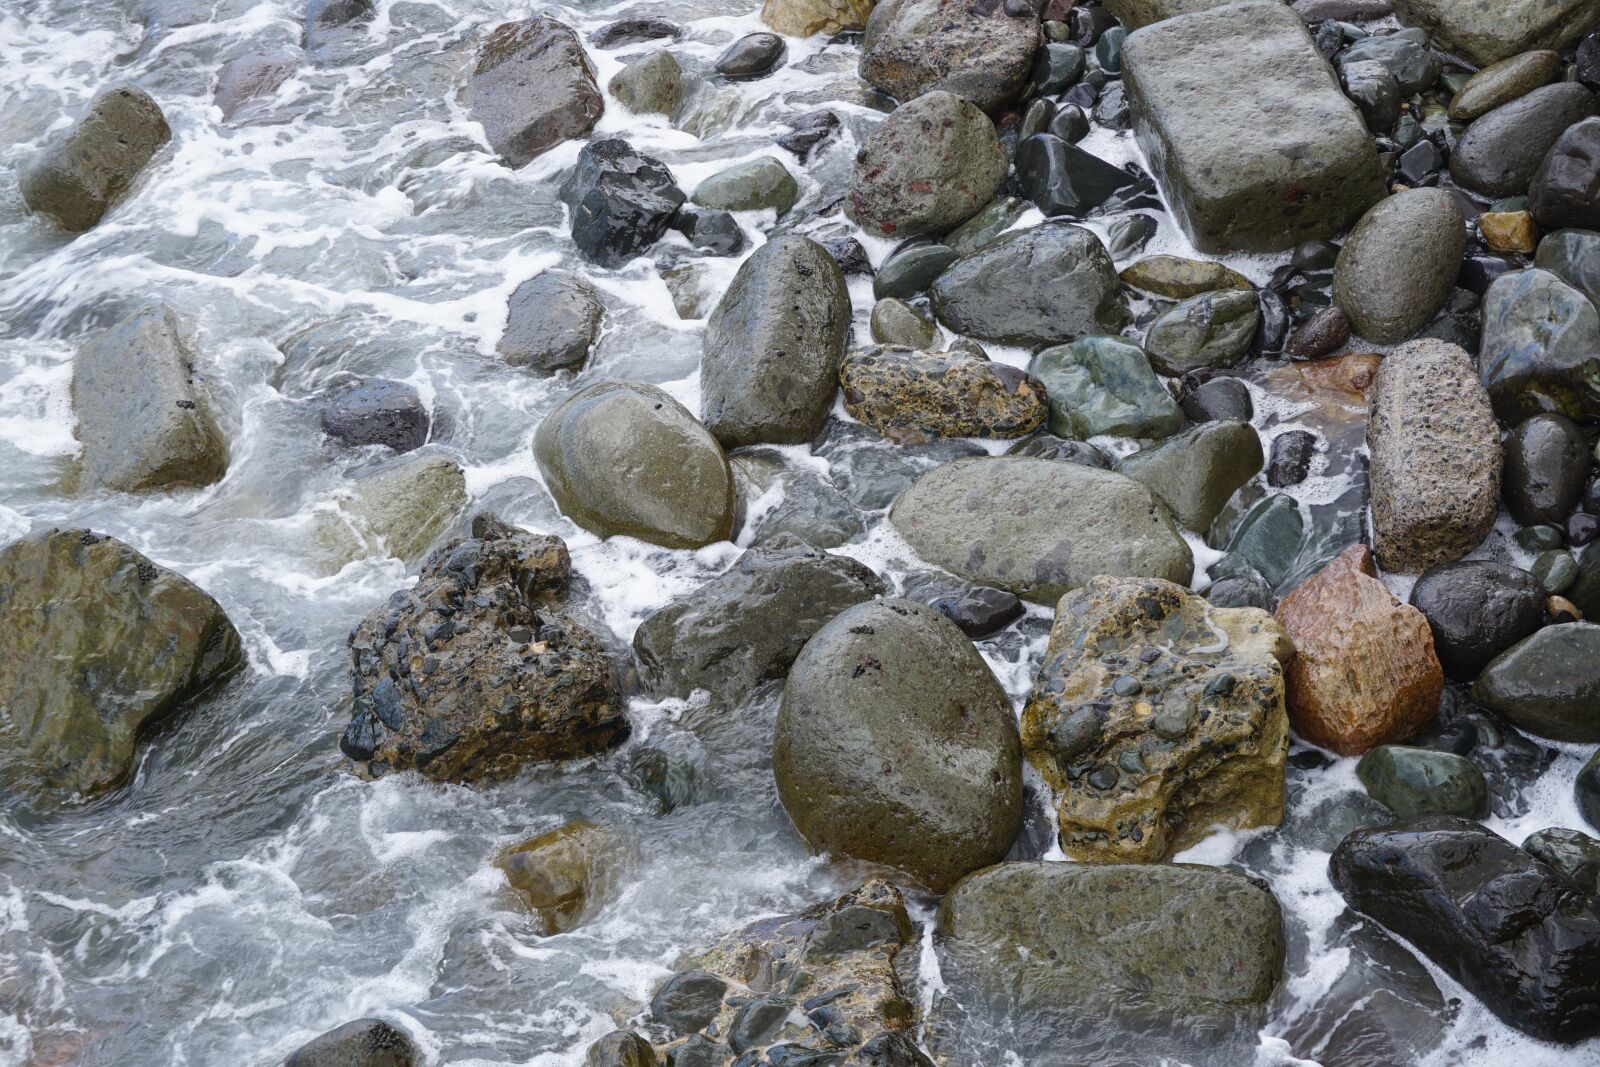 Sony a6000 sample photo. Water, stones, nature photography